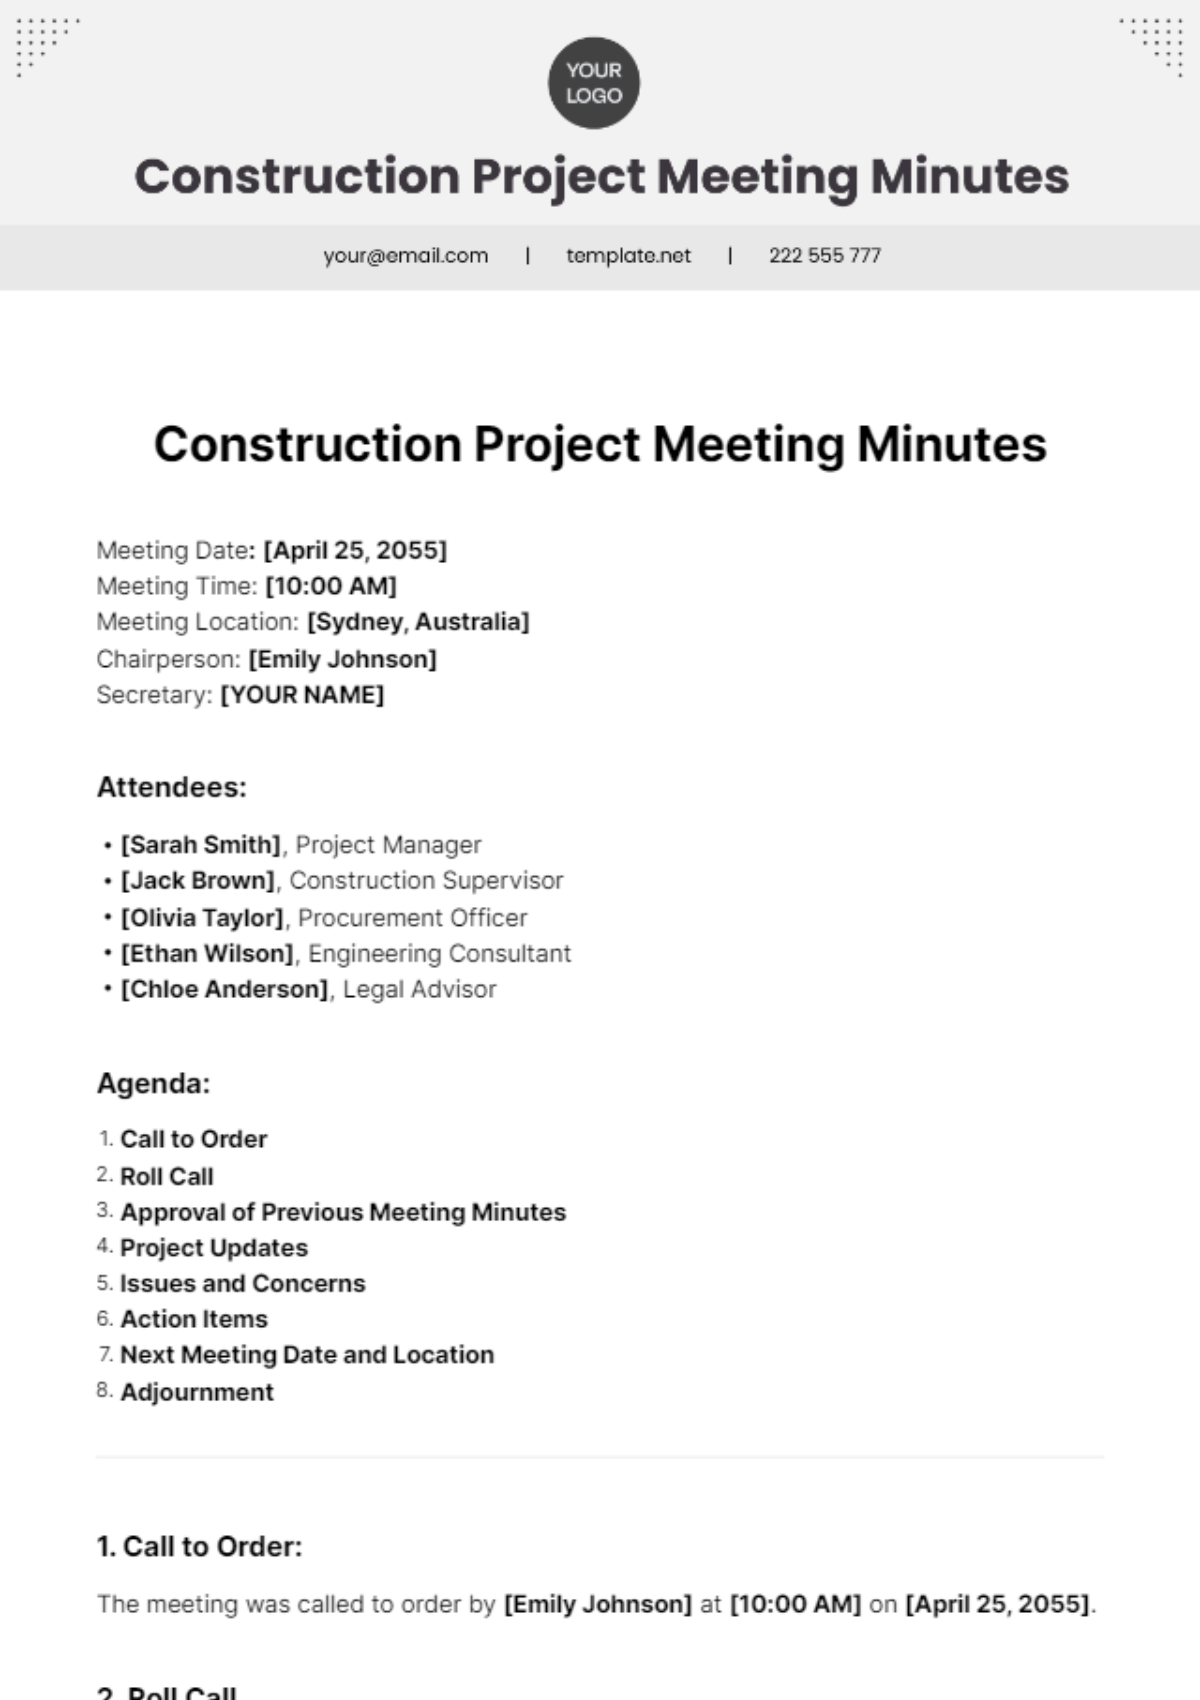 Construction Project Meeting Minutes Template